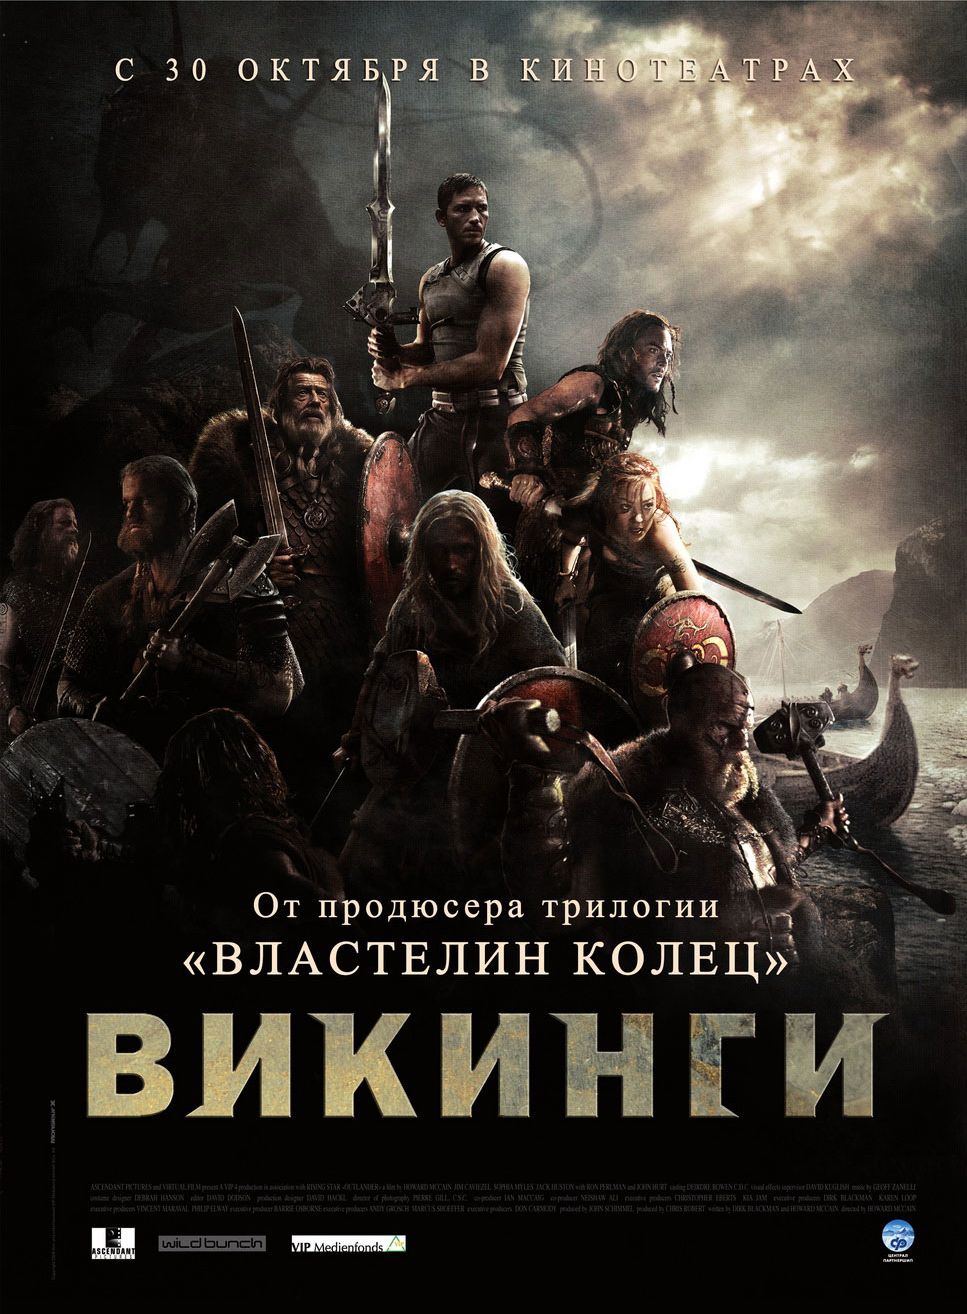 russian posters form